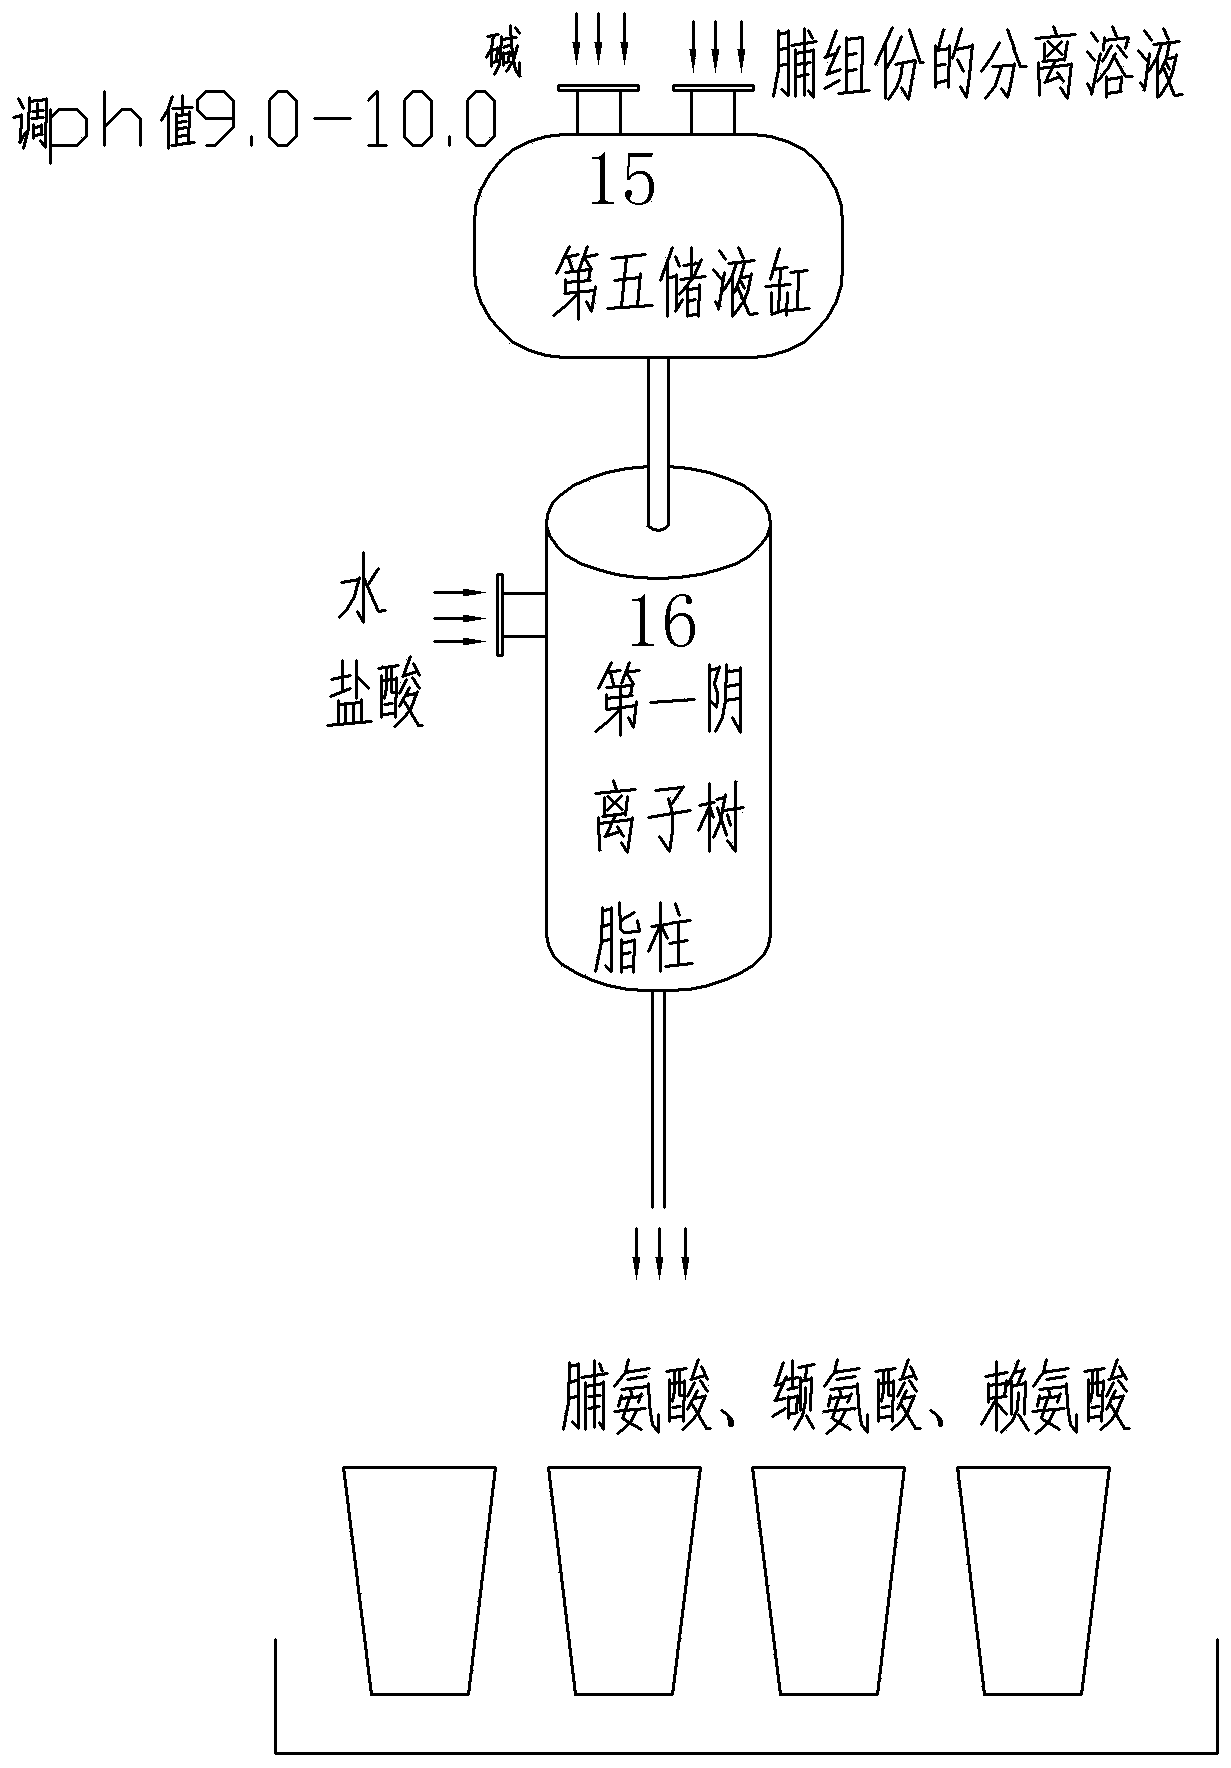 Method and device of separating and extracting amino acid products from protein hydrolysates